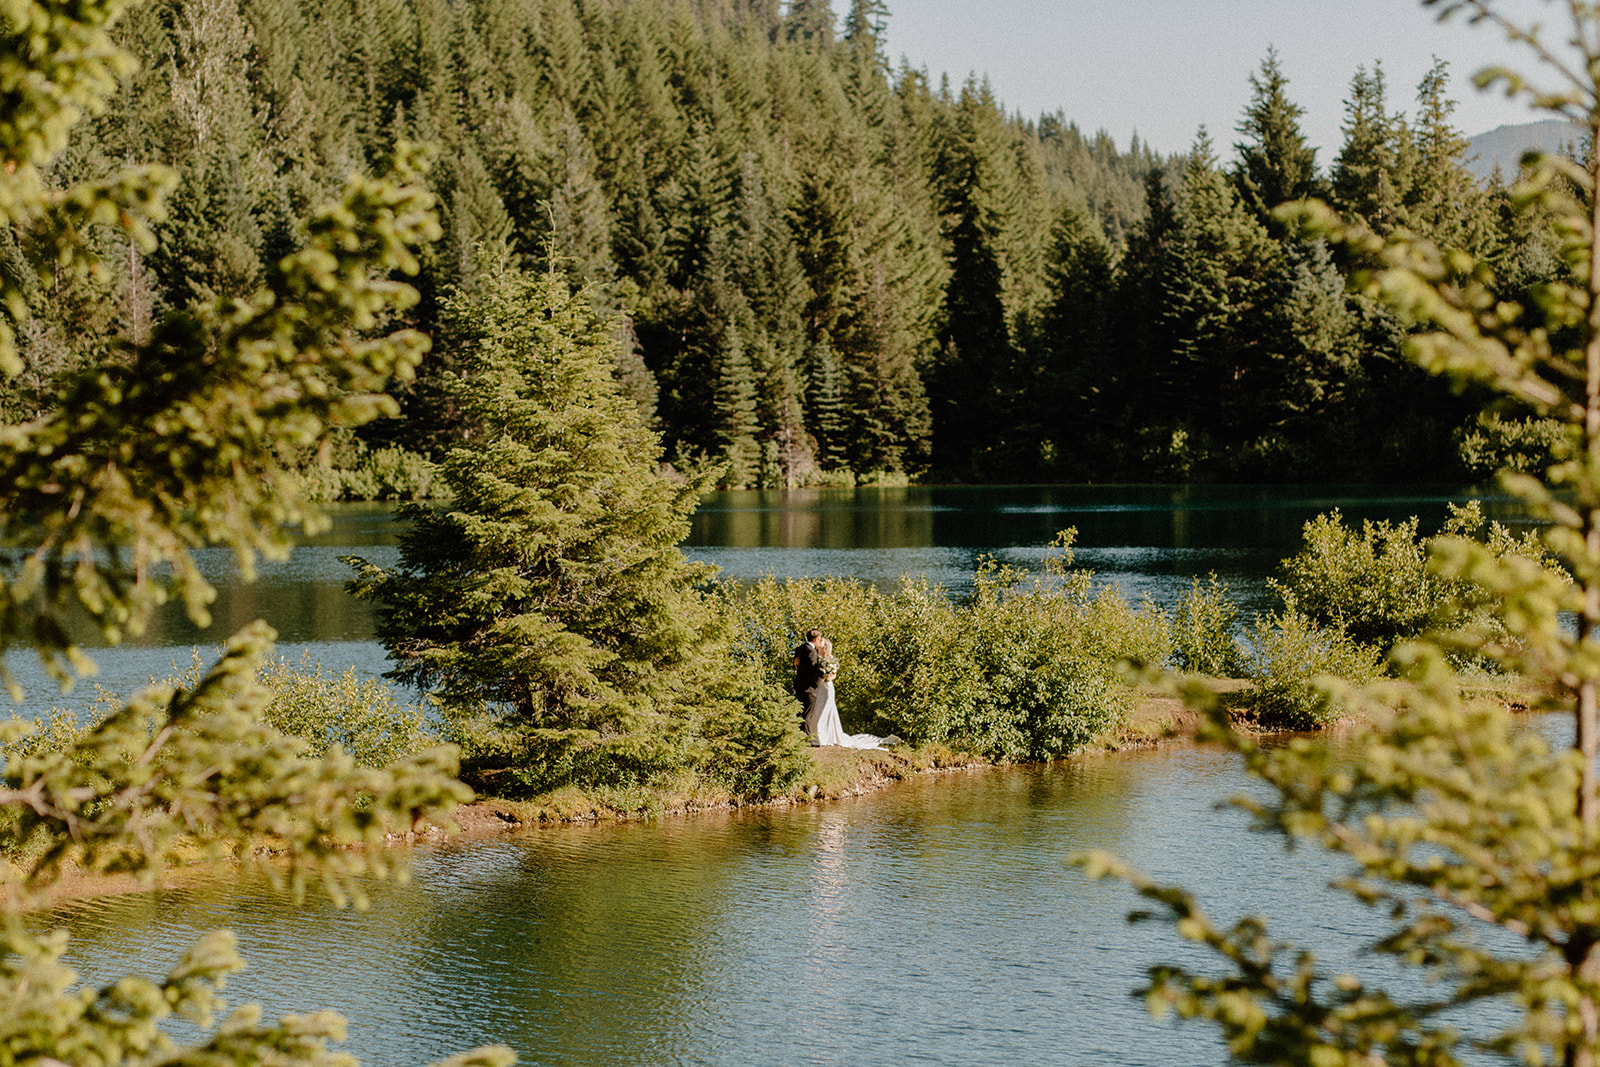 Gold Creek Pond elopement in Washington with beautiful florals and forest vibes